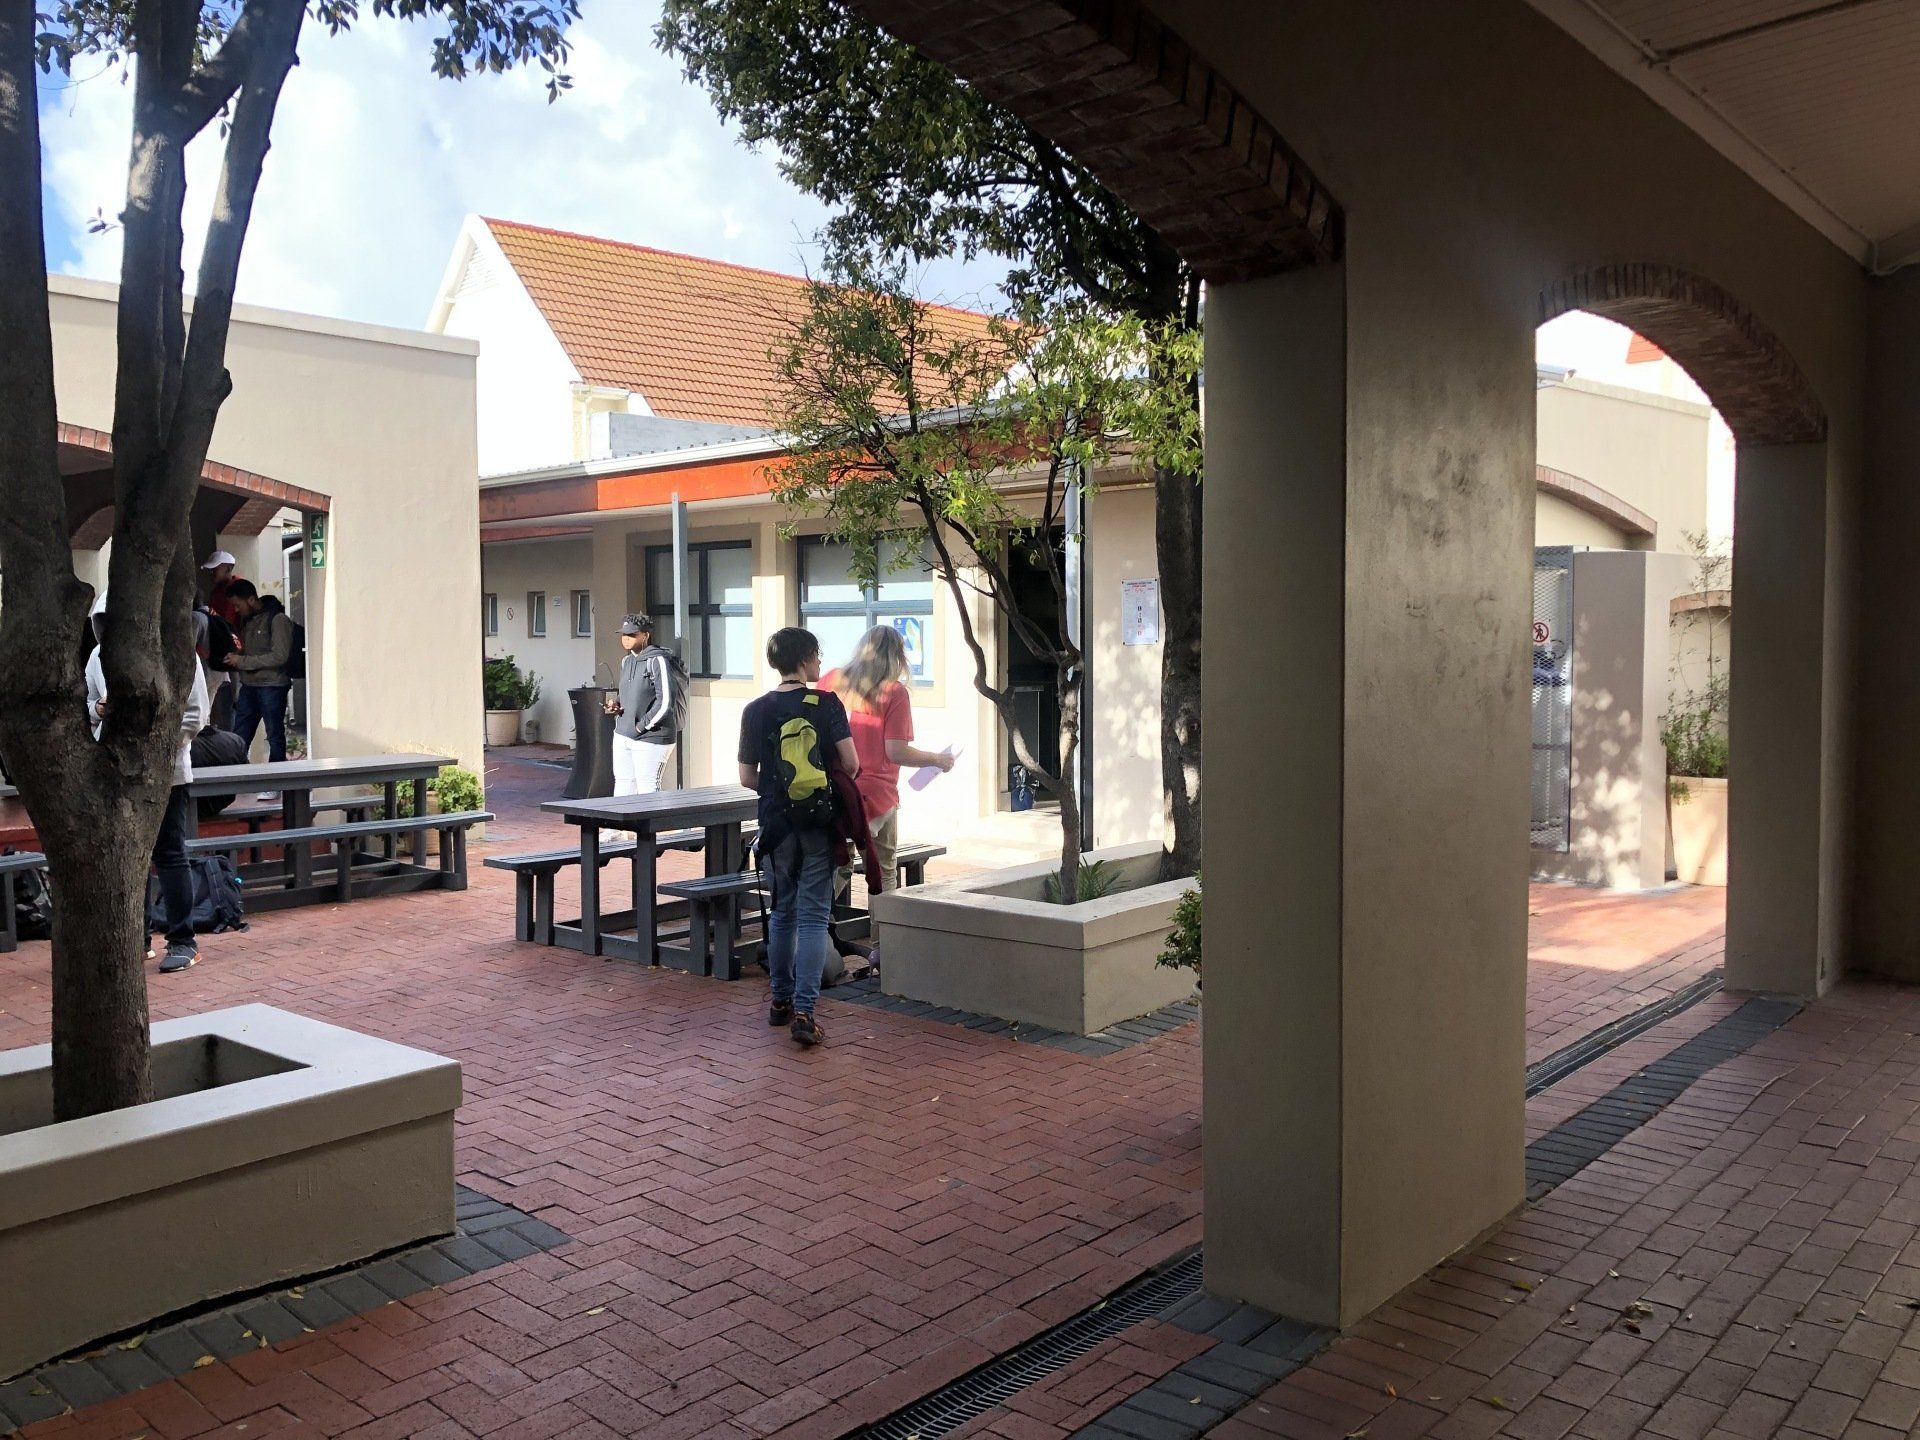 a group of students are walking through a courtyard with tables and benches .